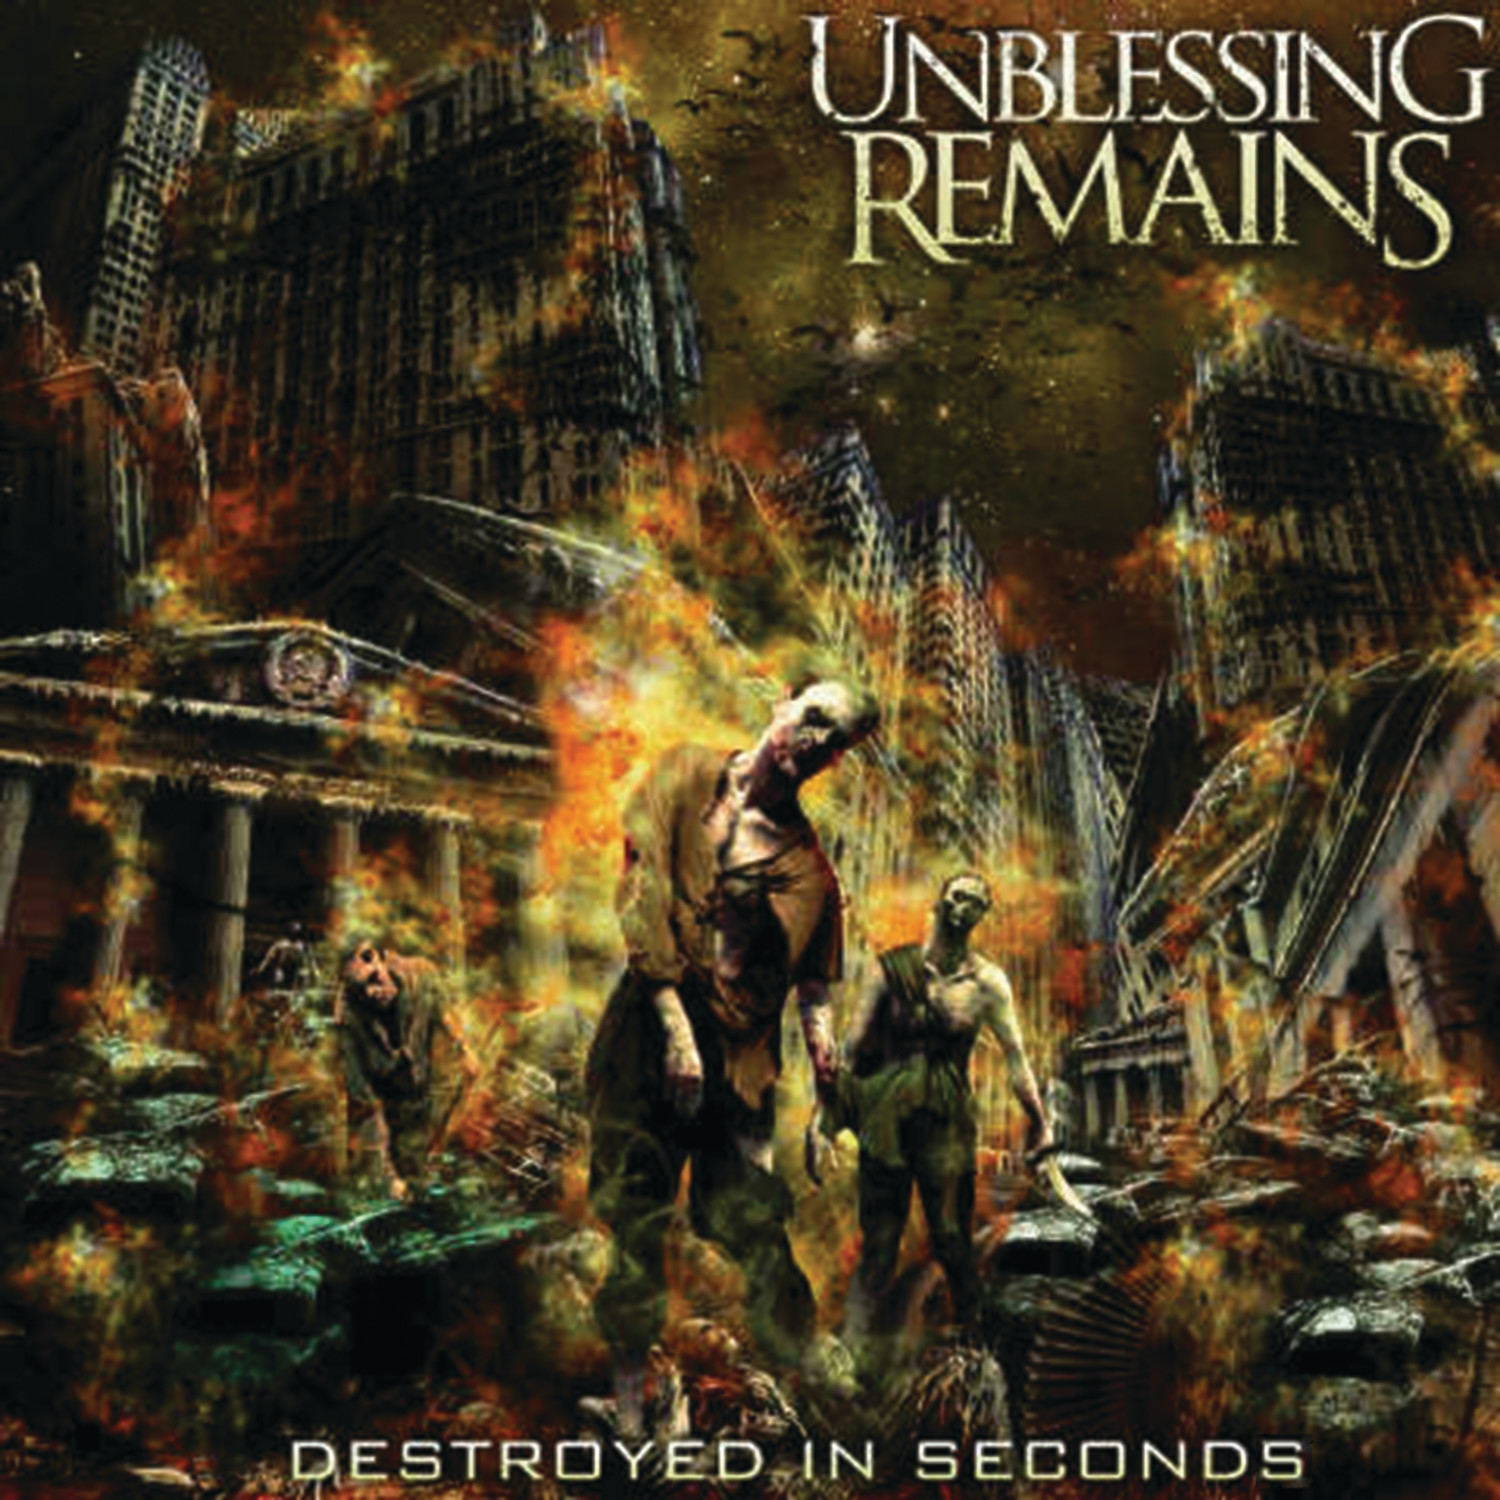 Unblessing Remains - Destroyed in Seconds (Digital)